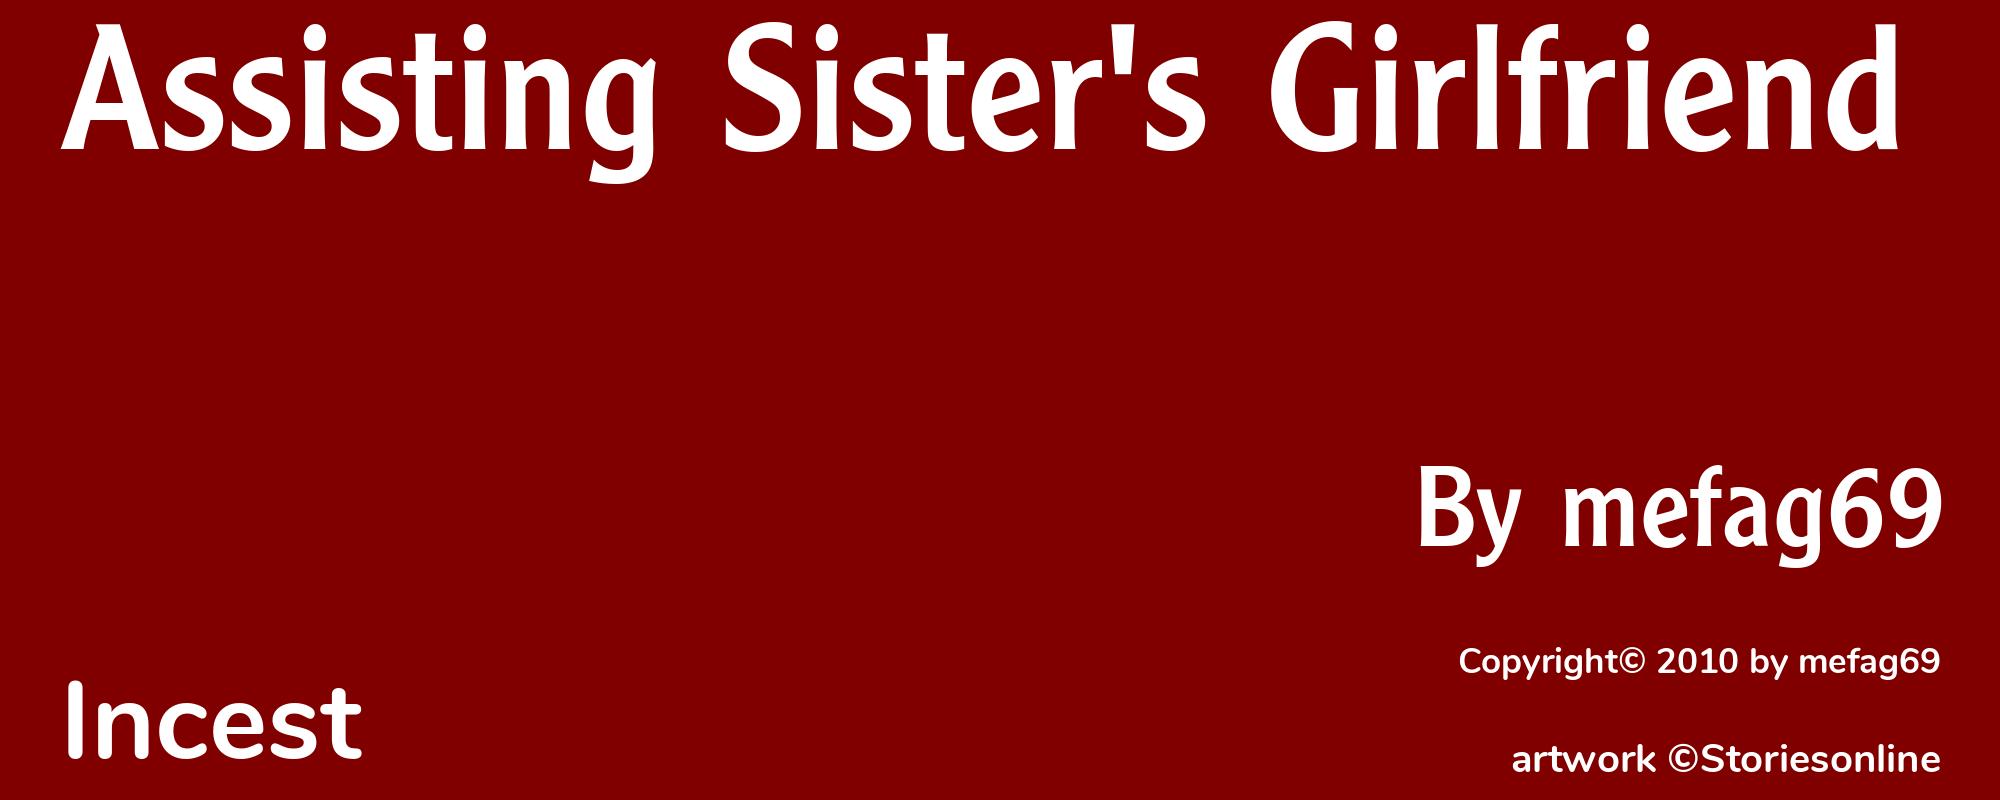 Assisting Sister's Girlfriend - Cover